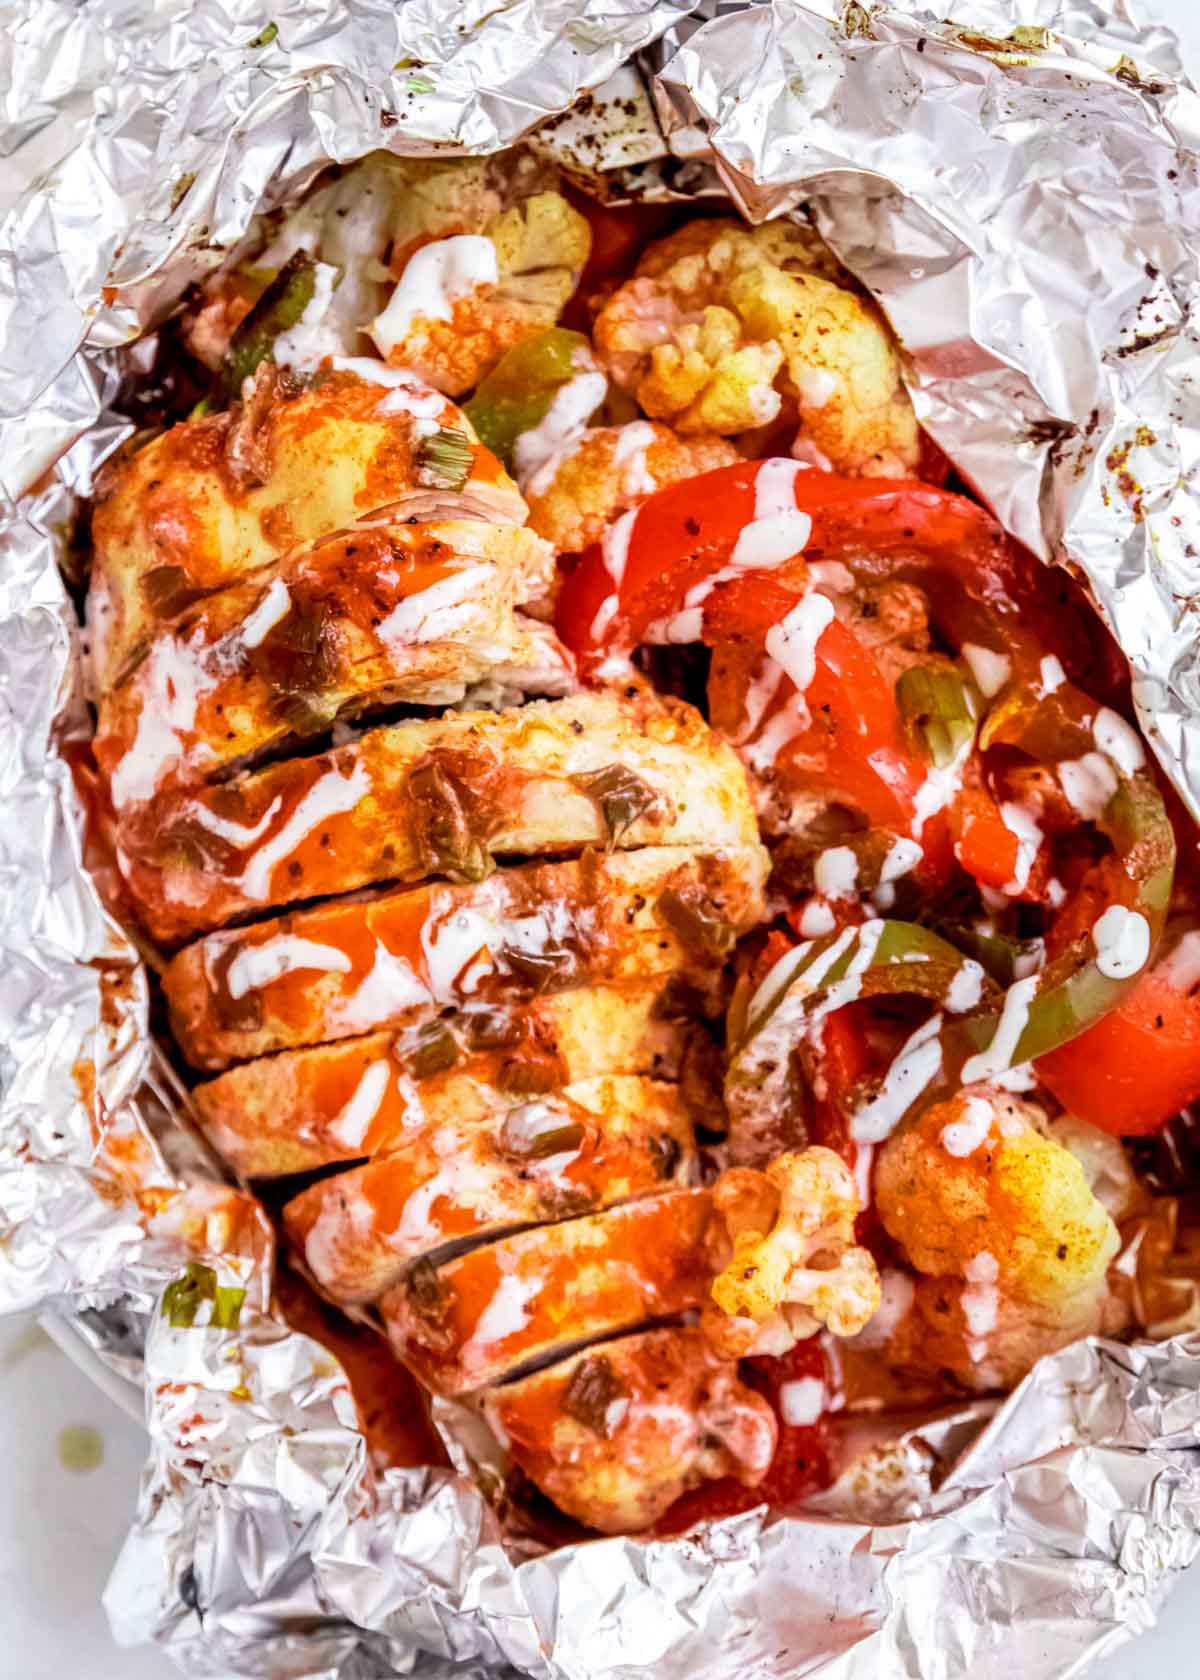 buffalo chicken and vegetables in foil pack